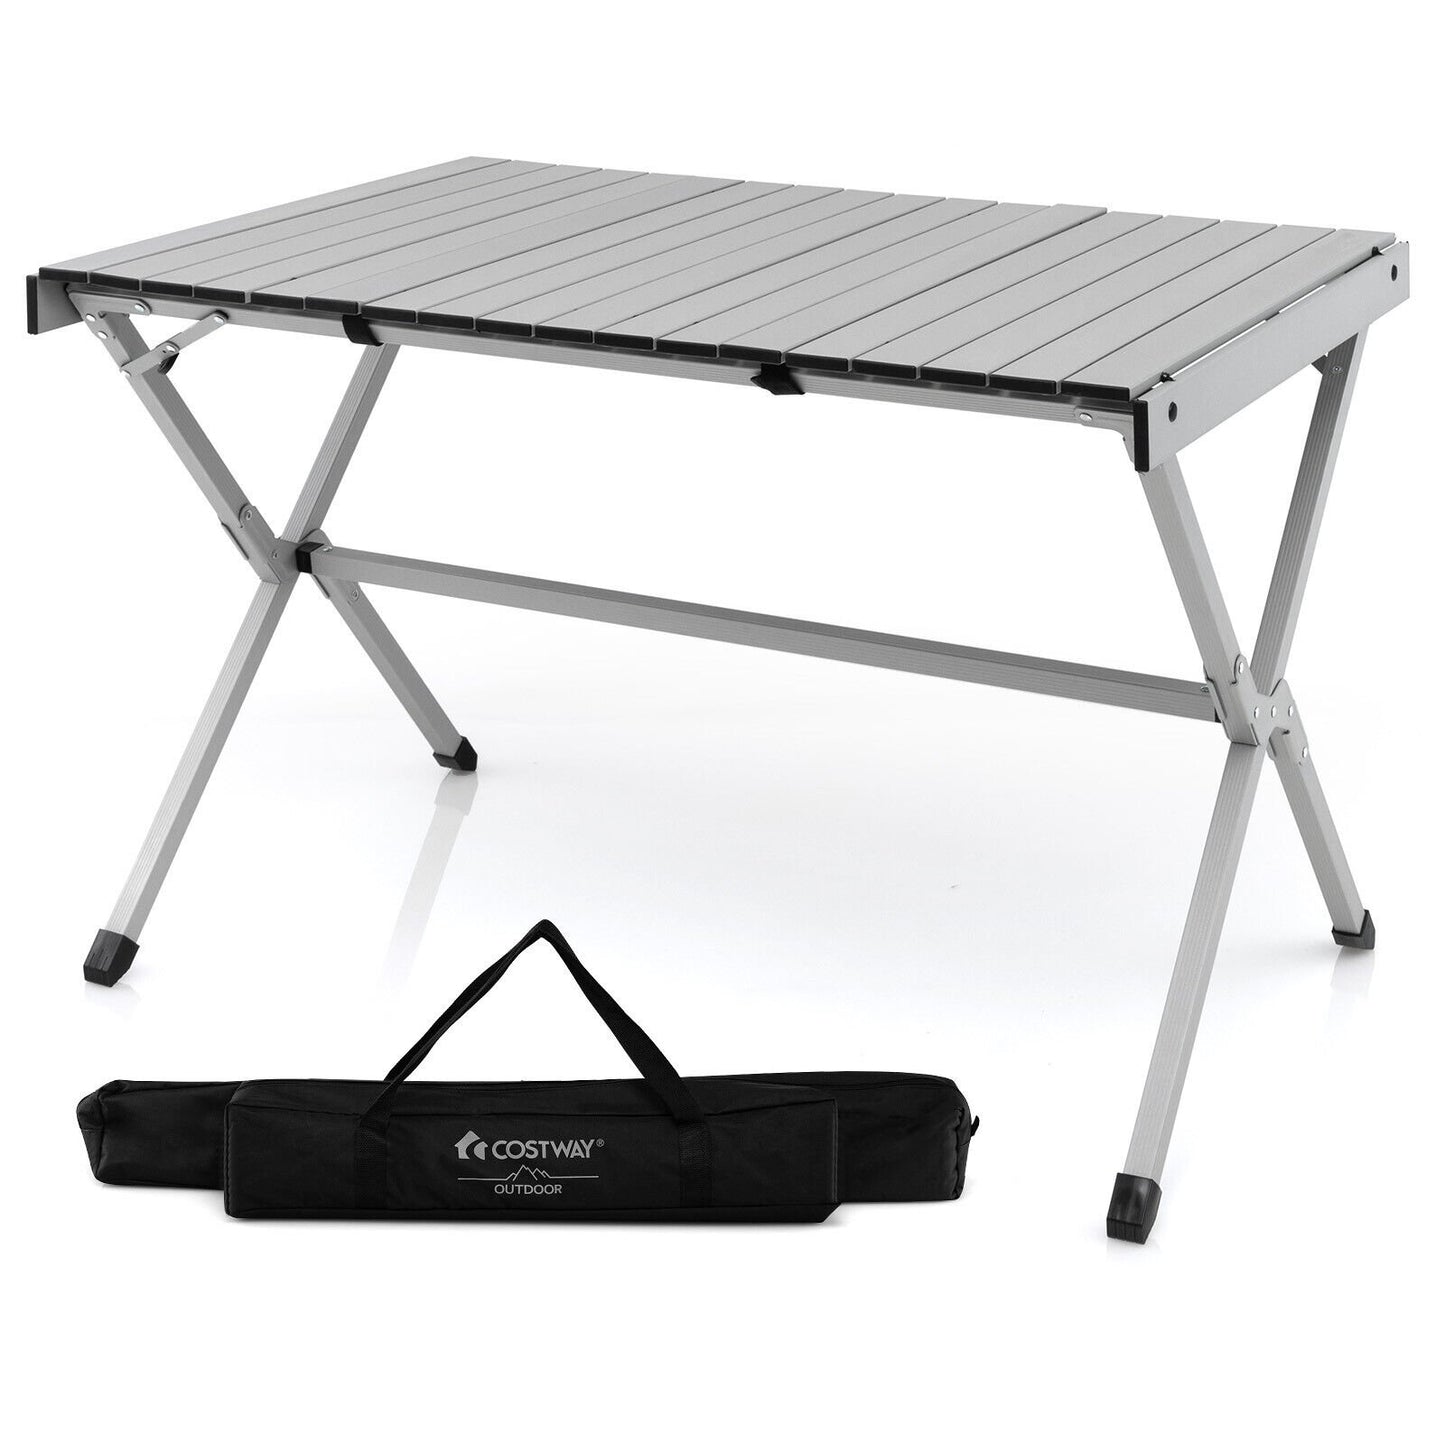 4-6 Person Portable Aluminum Camping Table with Carrying Bag, Gray